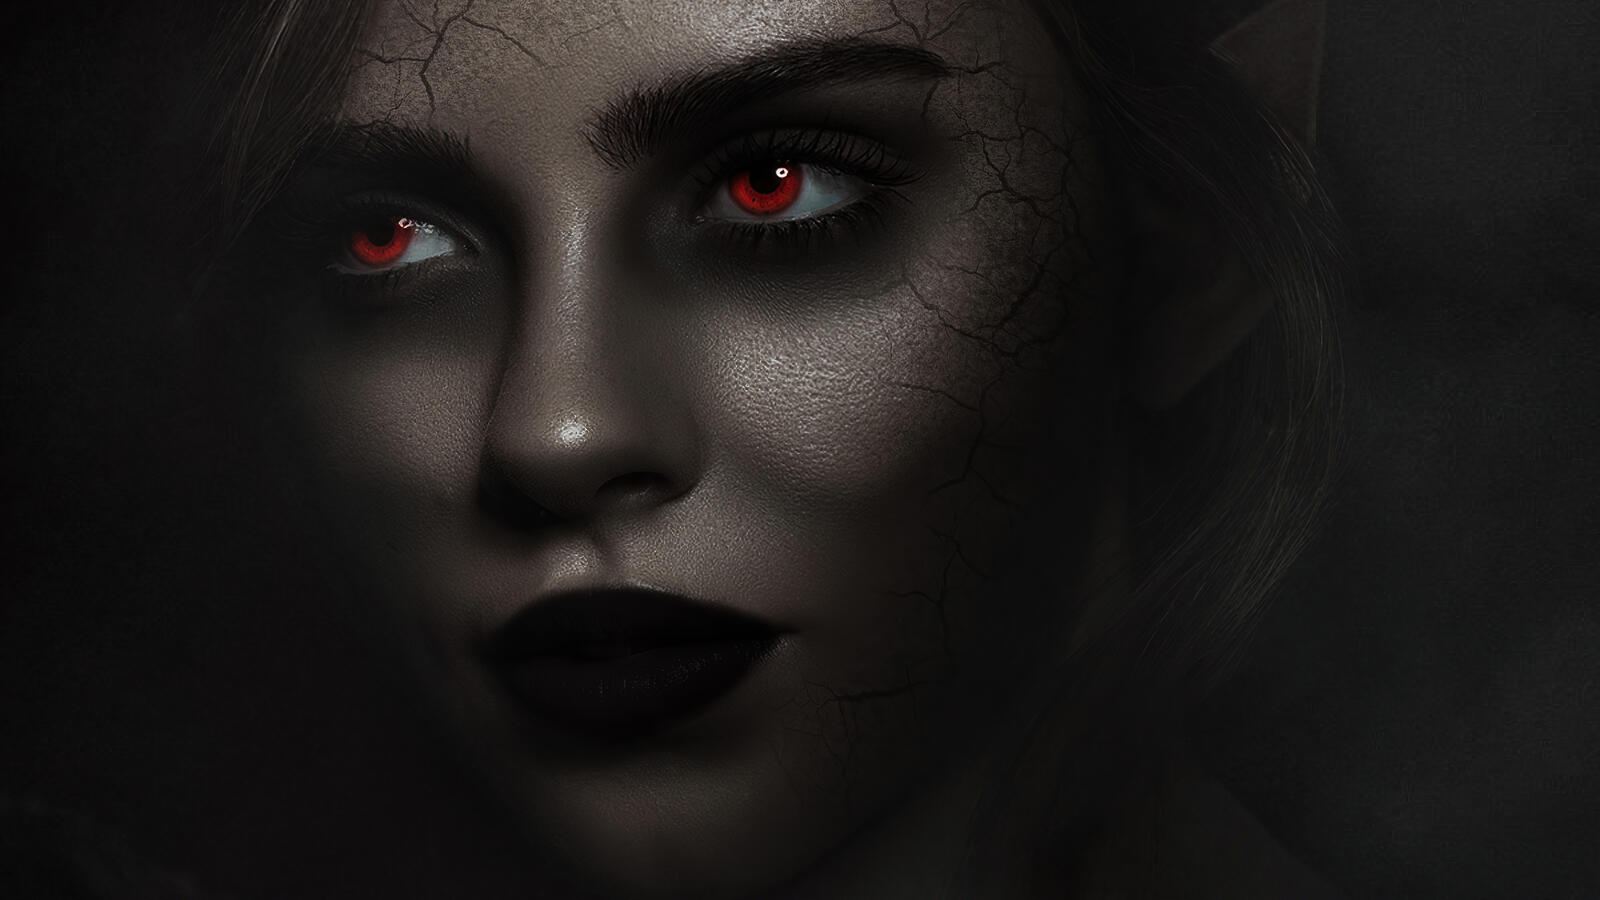 Free photo Rendering of a girl with red eyes on a dark background